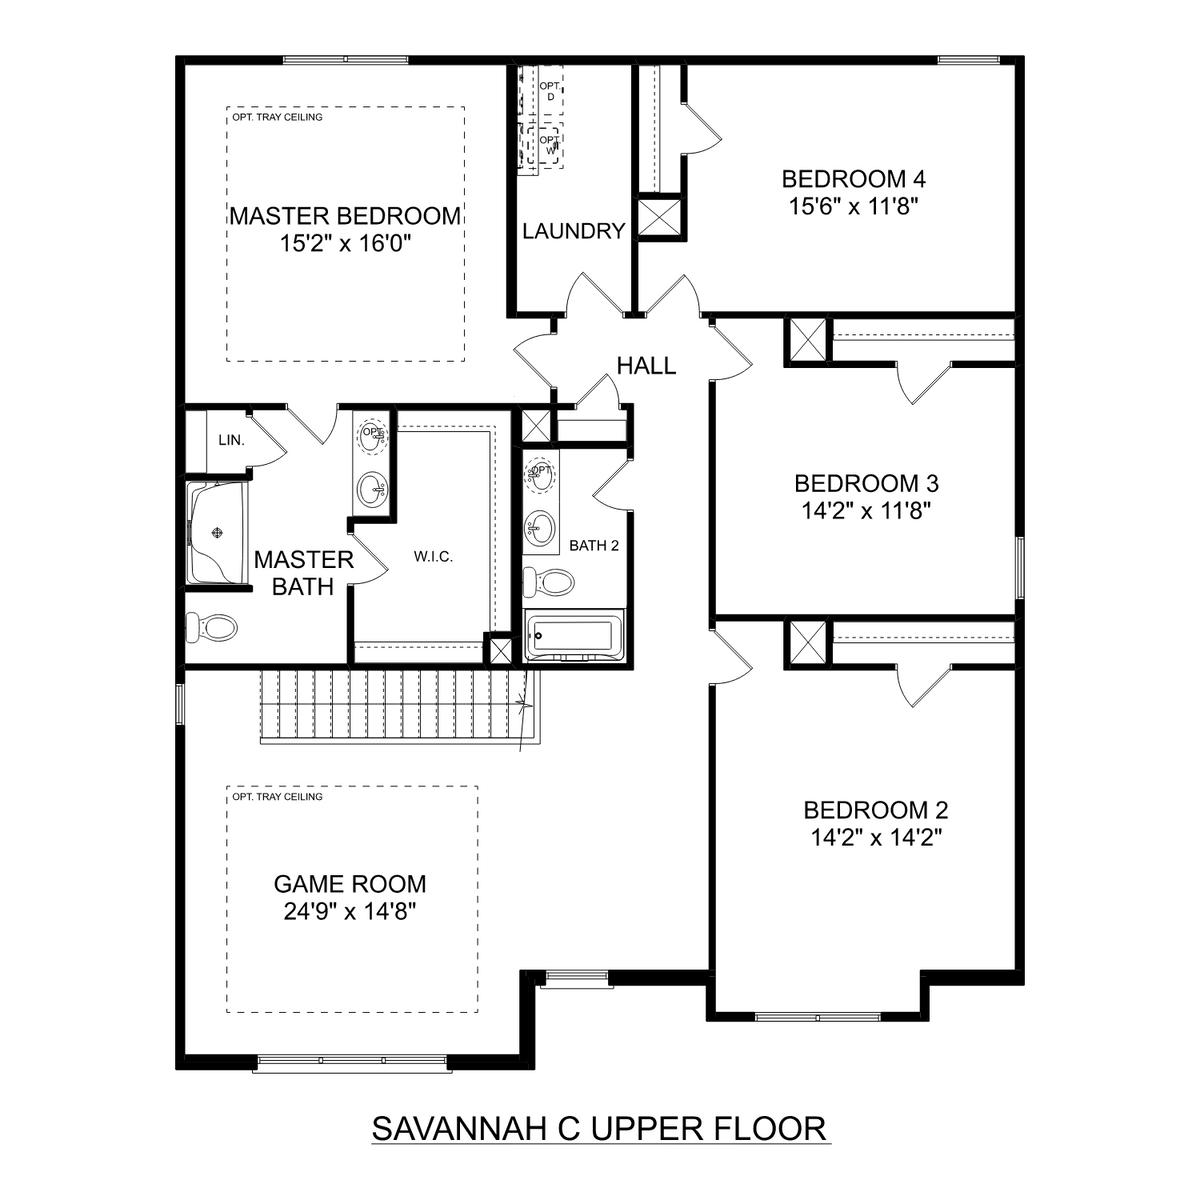 2 - The Savannah C floor plan layout for 4020 Rockland Circle in Davidson Homes' Monteagle Cove community.